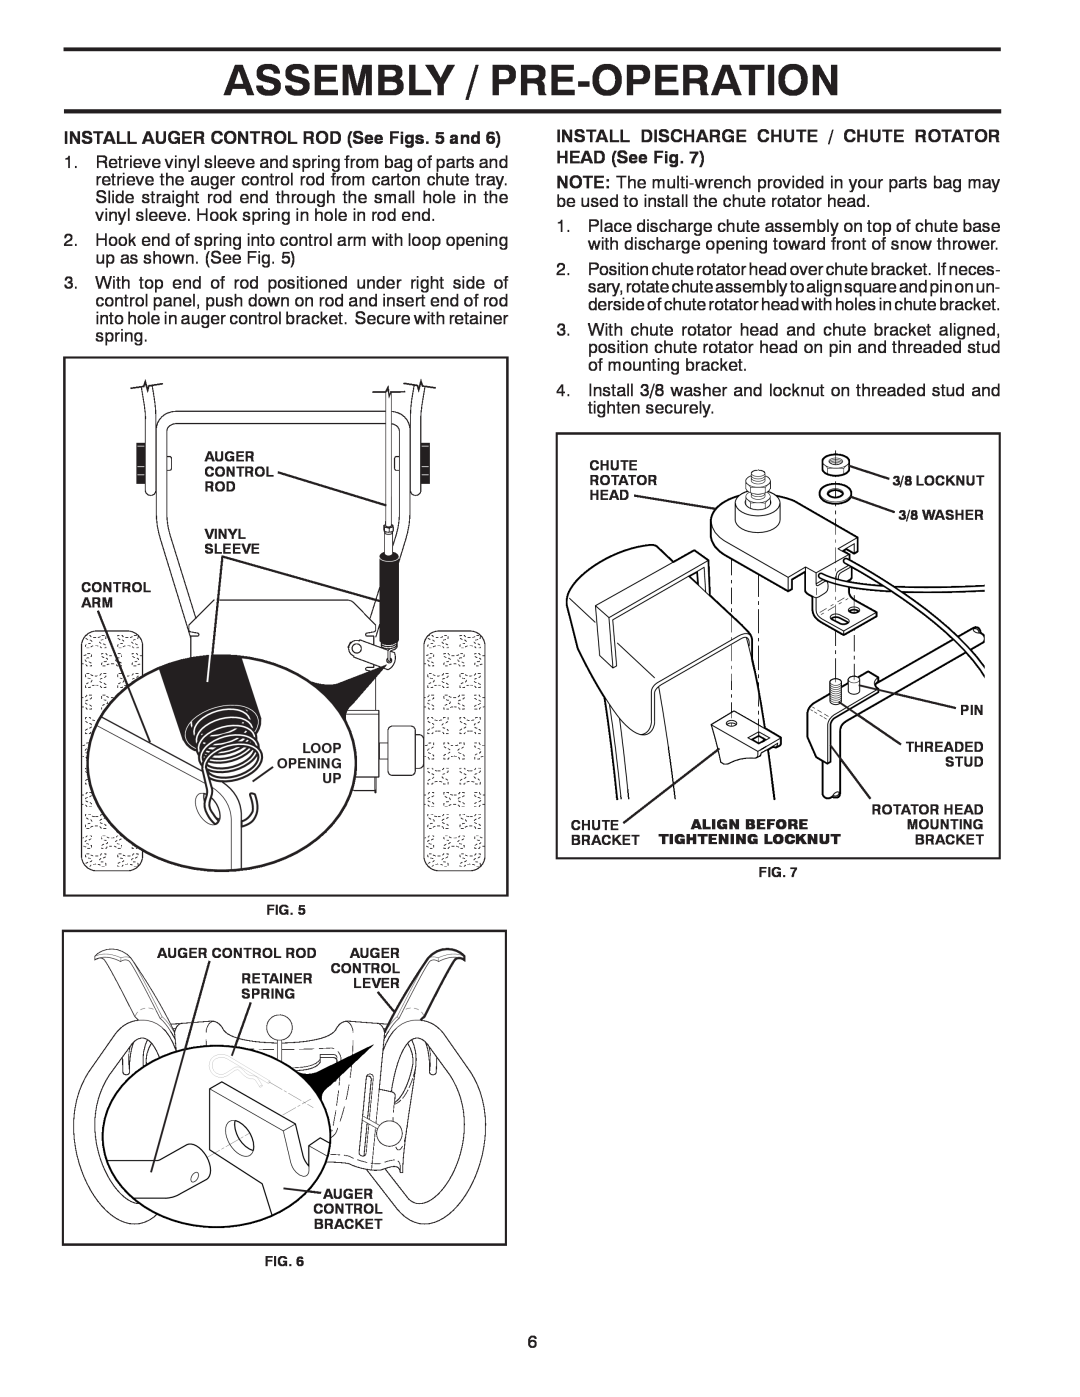 Poulan 428695, 96192003001 owner manual Assembly / Pre-Operation, INSTALL AUGER CONTROL ROD See Figs. 5 and 